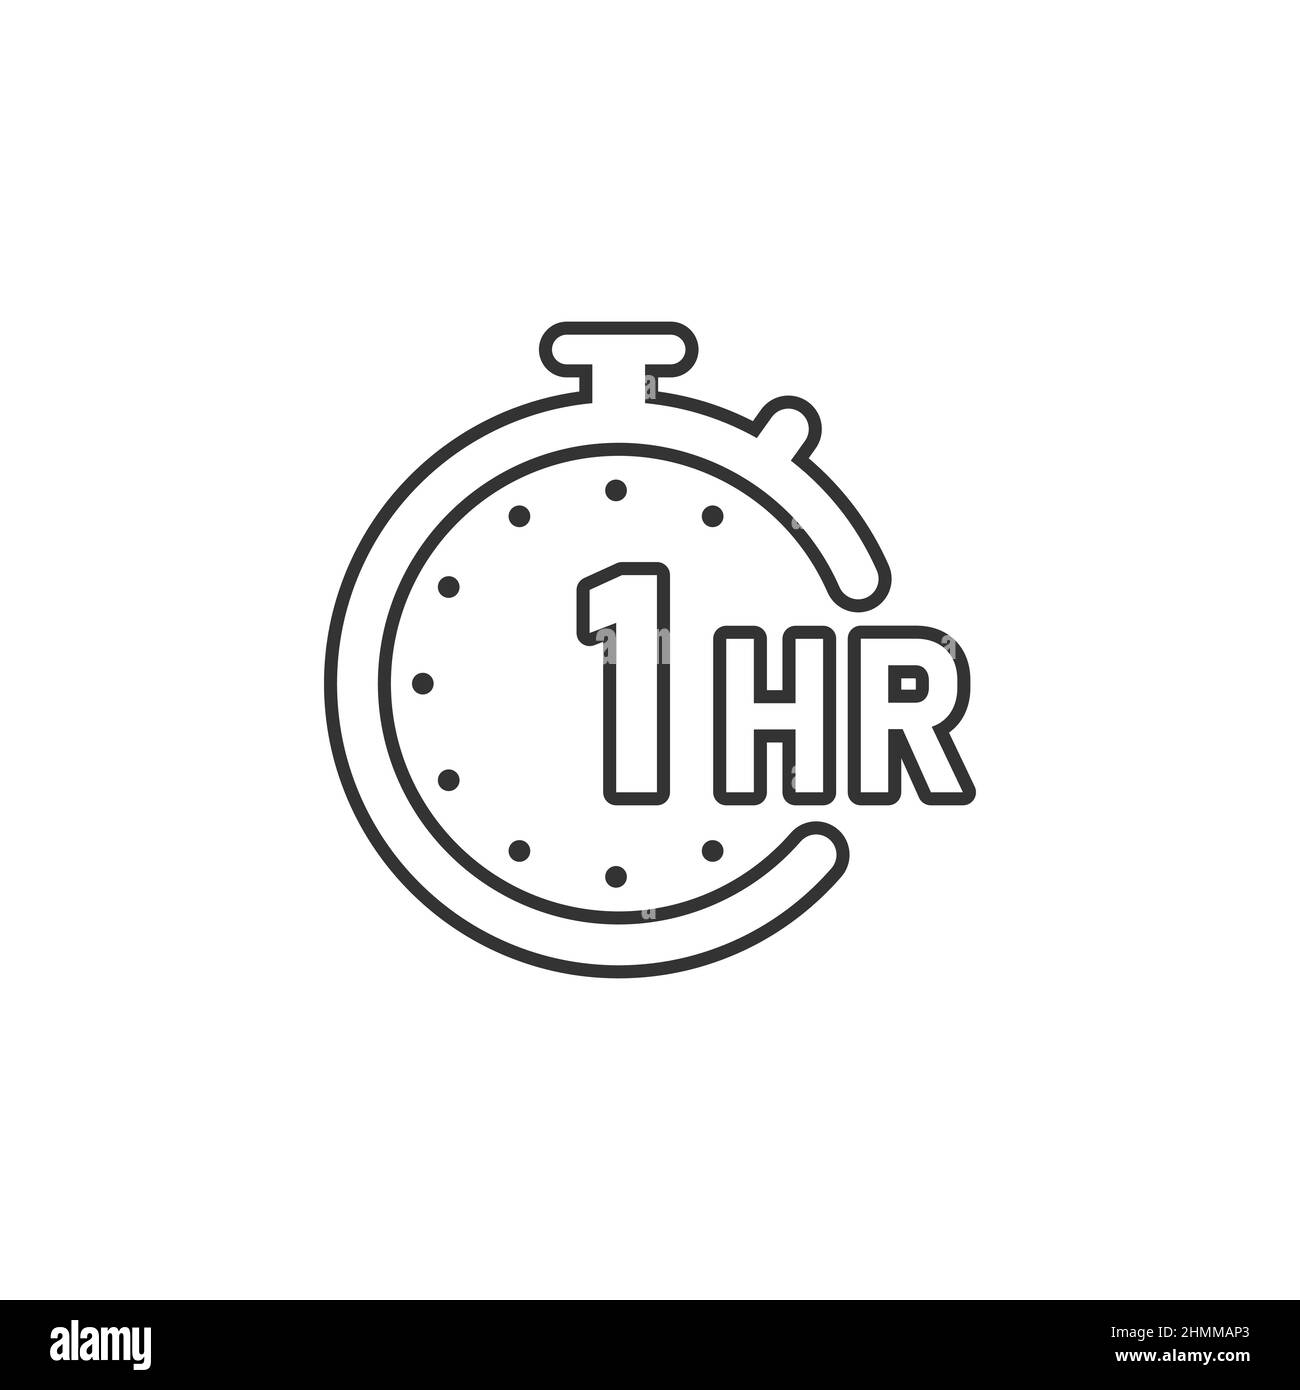 https://c8.alamy.com/comp/2HMMAP3/1-hour-clock-icon-in-flat-style-timer-countdown-vector-illustration-on-isolated-background-time-measure-sign-business-concept-2HMMAP3.jpg